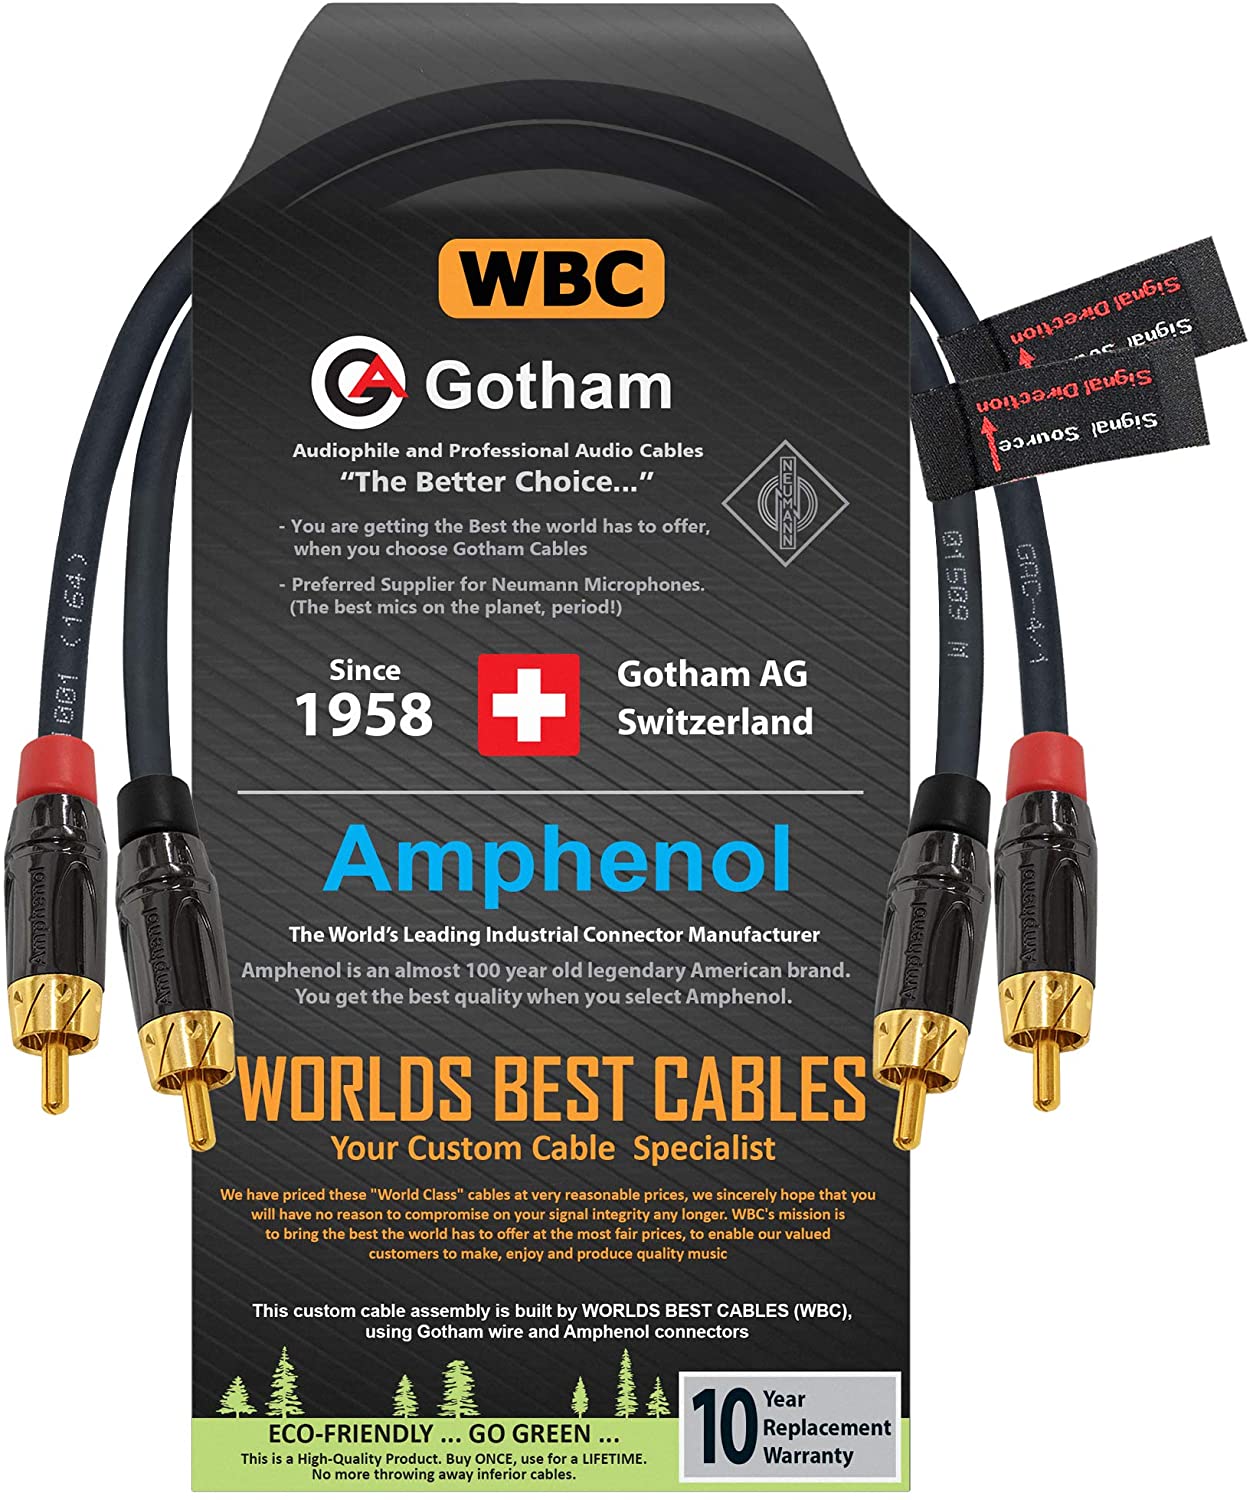 0.5 Foot RCA Cable Pair - Gotham GAC-4-1 (Black) Star-Quad Audio Interconnect Cable with Amphe...jpg